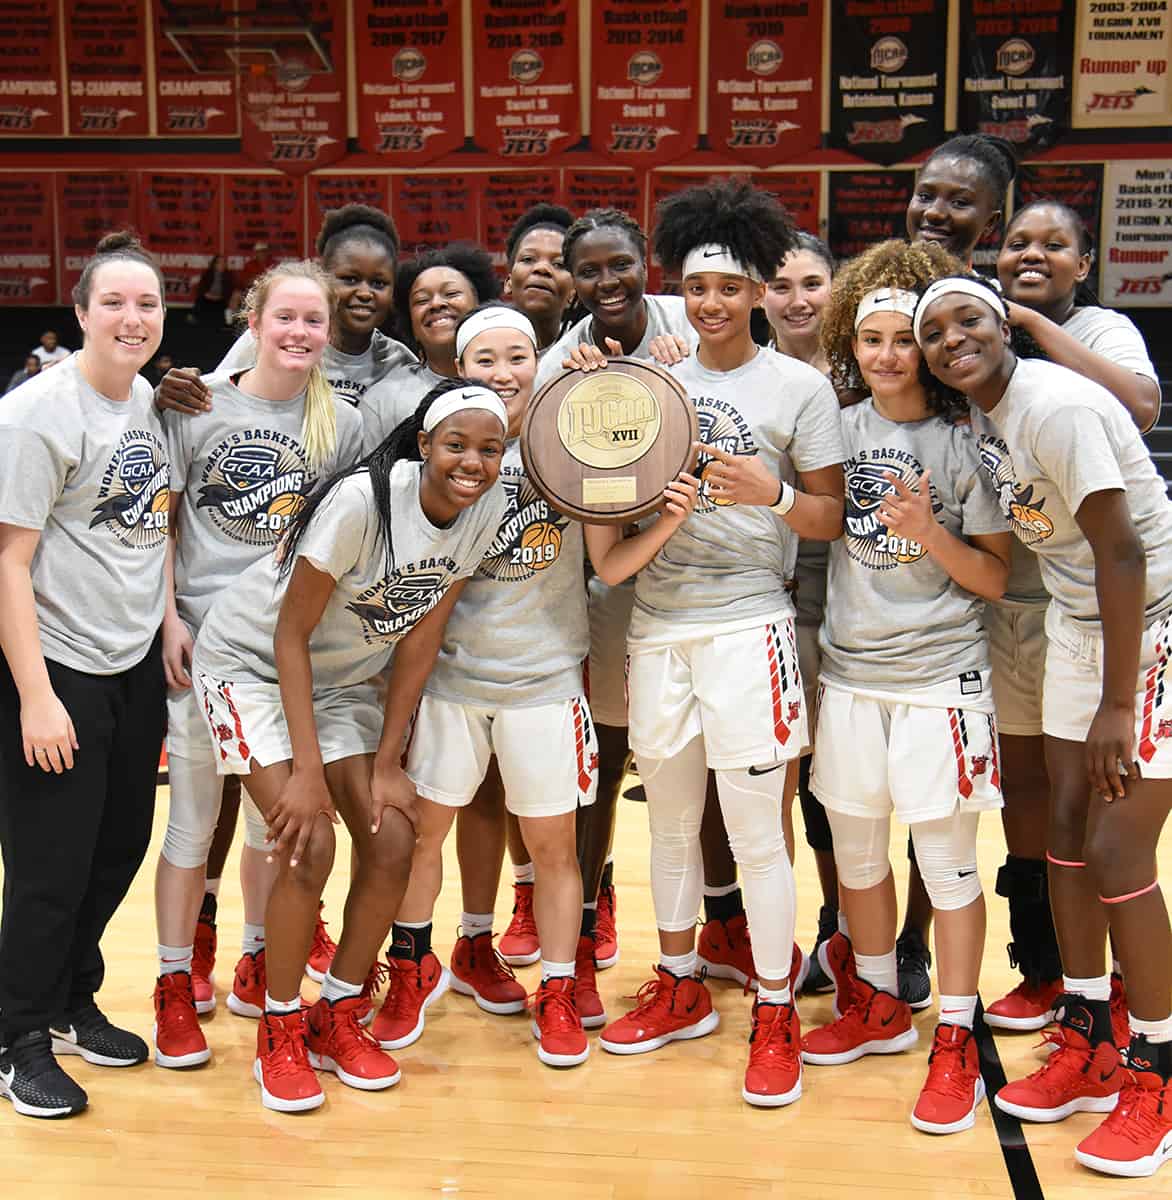 The South Georgia Technical College Lady Jets are headed to NJCAA Division I National Tournament for third straight year.